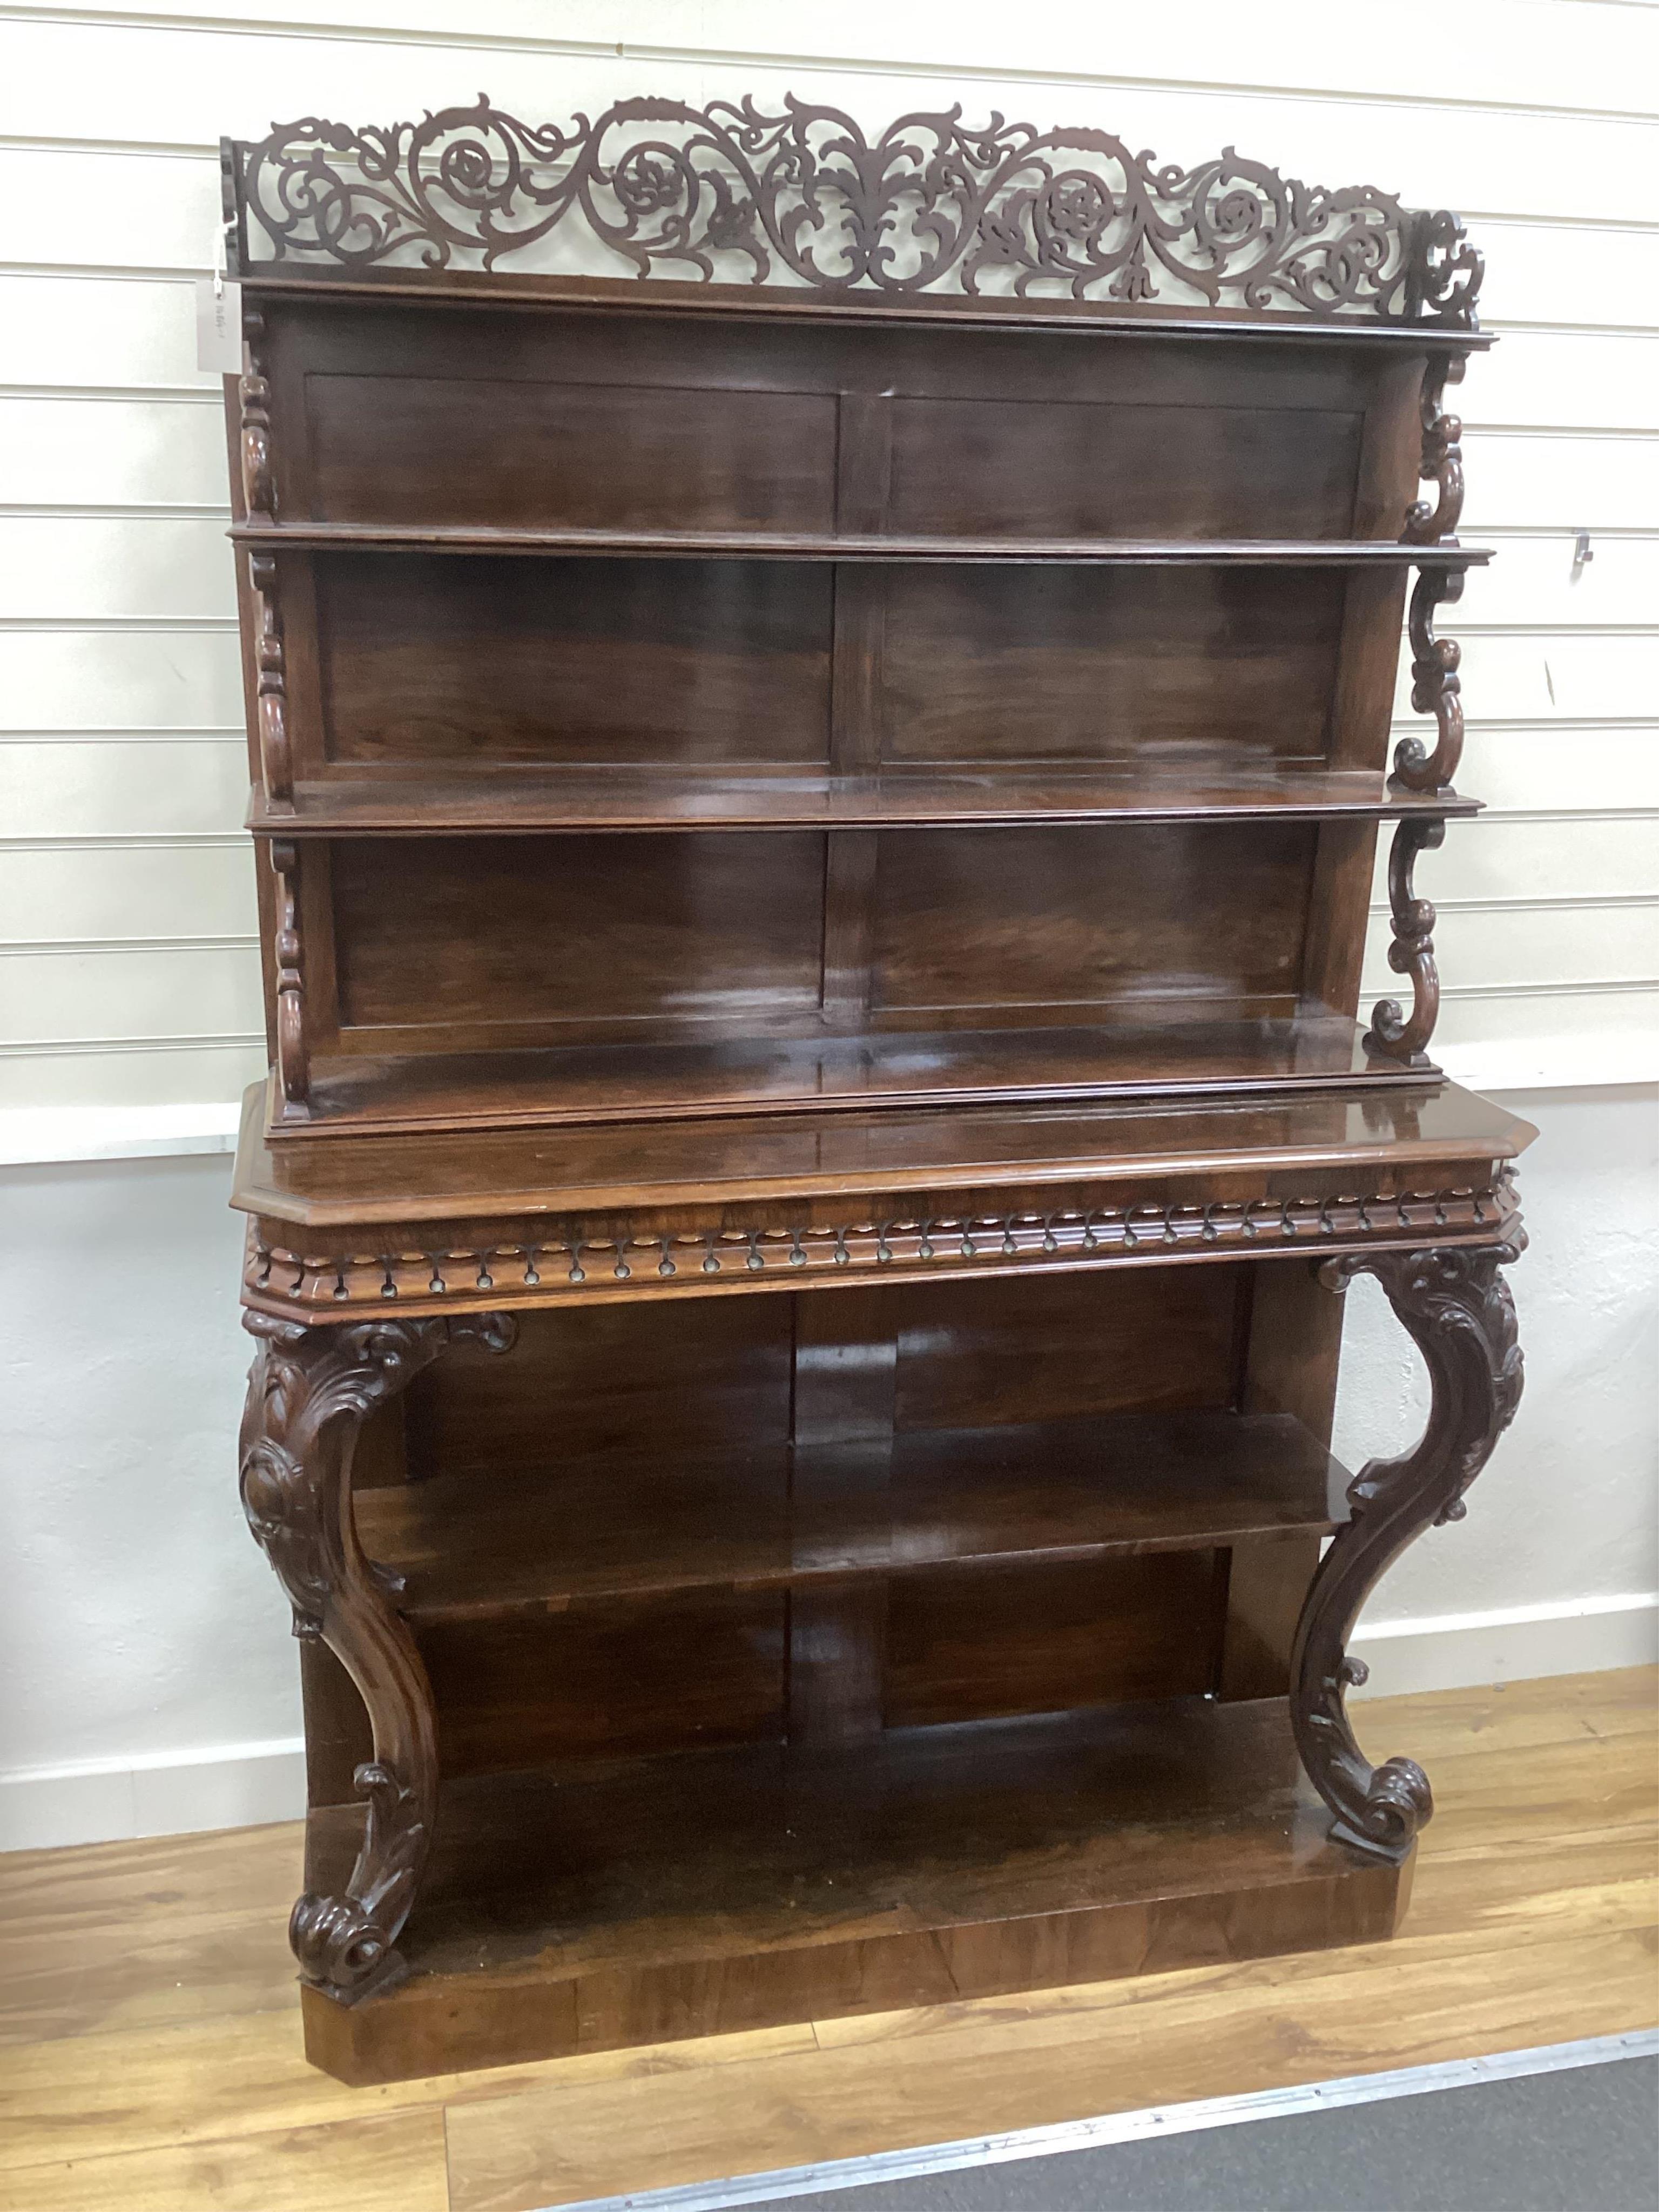 An early Victorian rosewood chiffonier, possibly Irish, width 122cm, depth 40cm, height 180cm. Condition - good